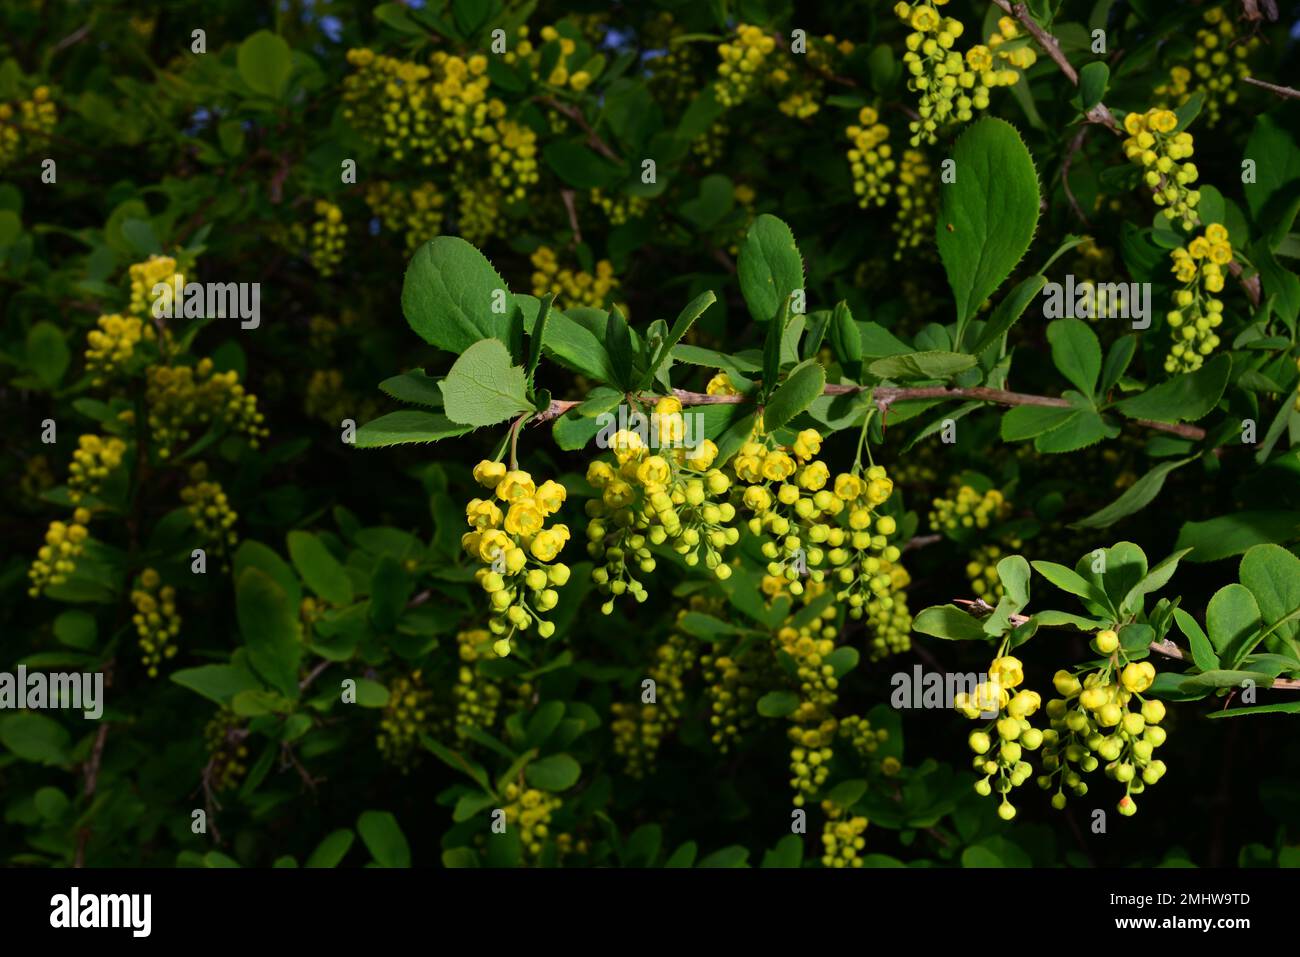 Barberry blooms in the spring garden. Small yellow flowers of barberry shrub Stock Photo